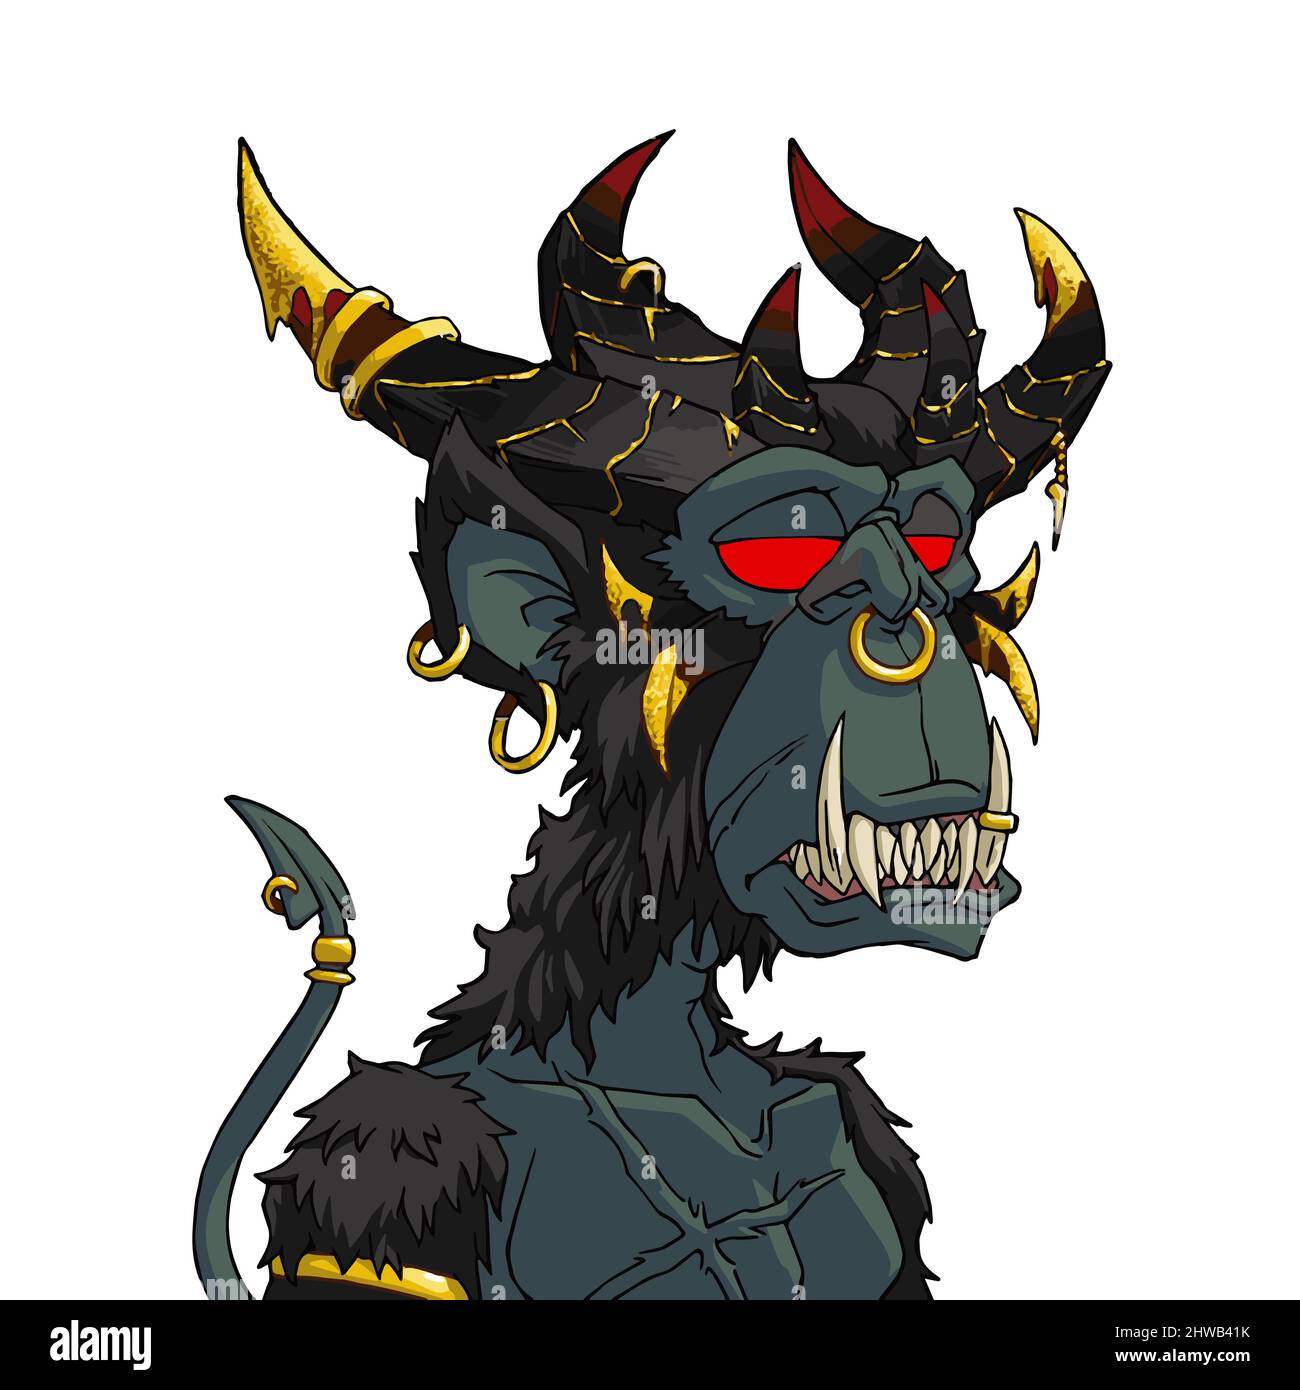 Mutant ape yacht club NFT artwork. Demonic evil monkey with horns and red eyes. Crypto graphic asset . Flat vector illustration. Stock Vector